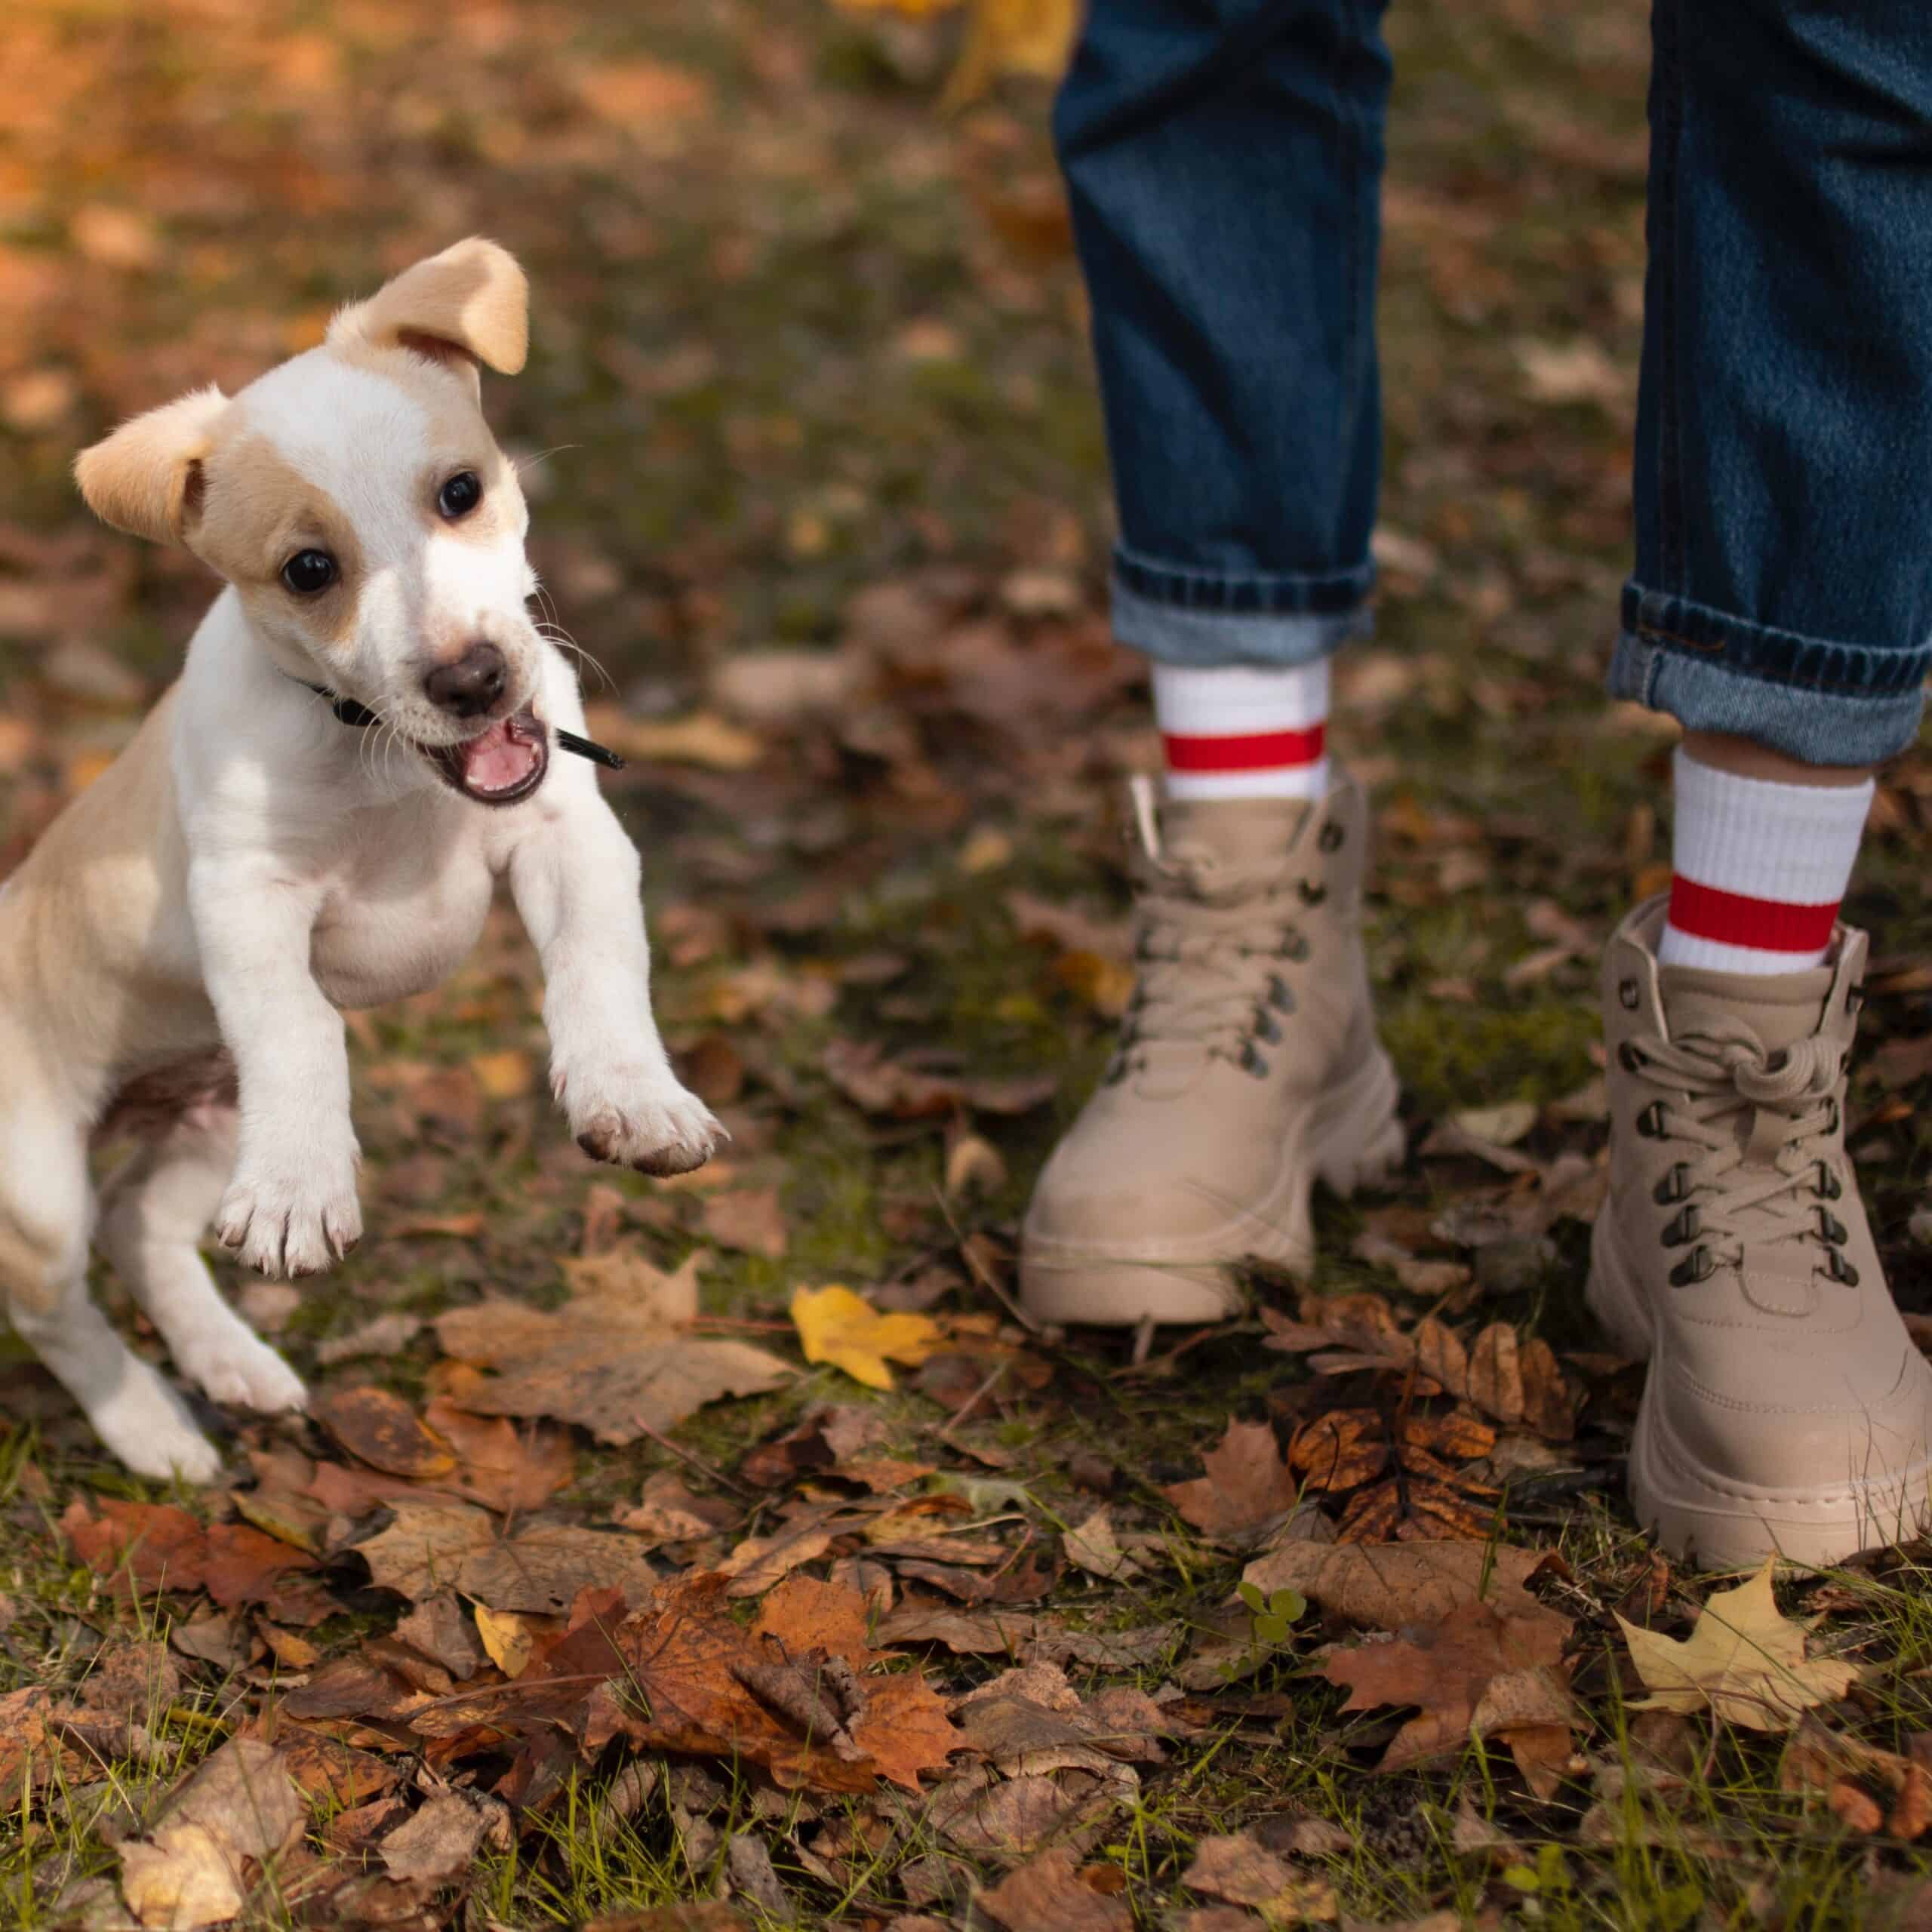 How To Clean Dog Poop Off Shoes? 7 Useful Tips